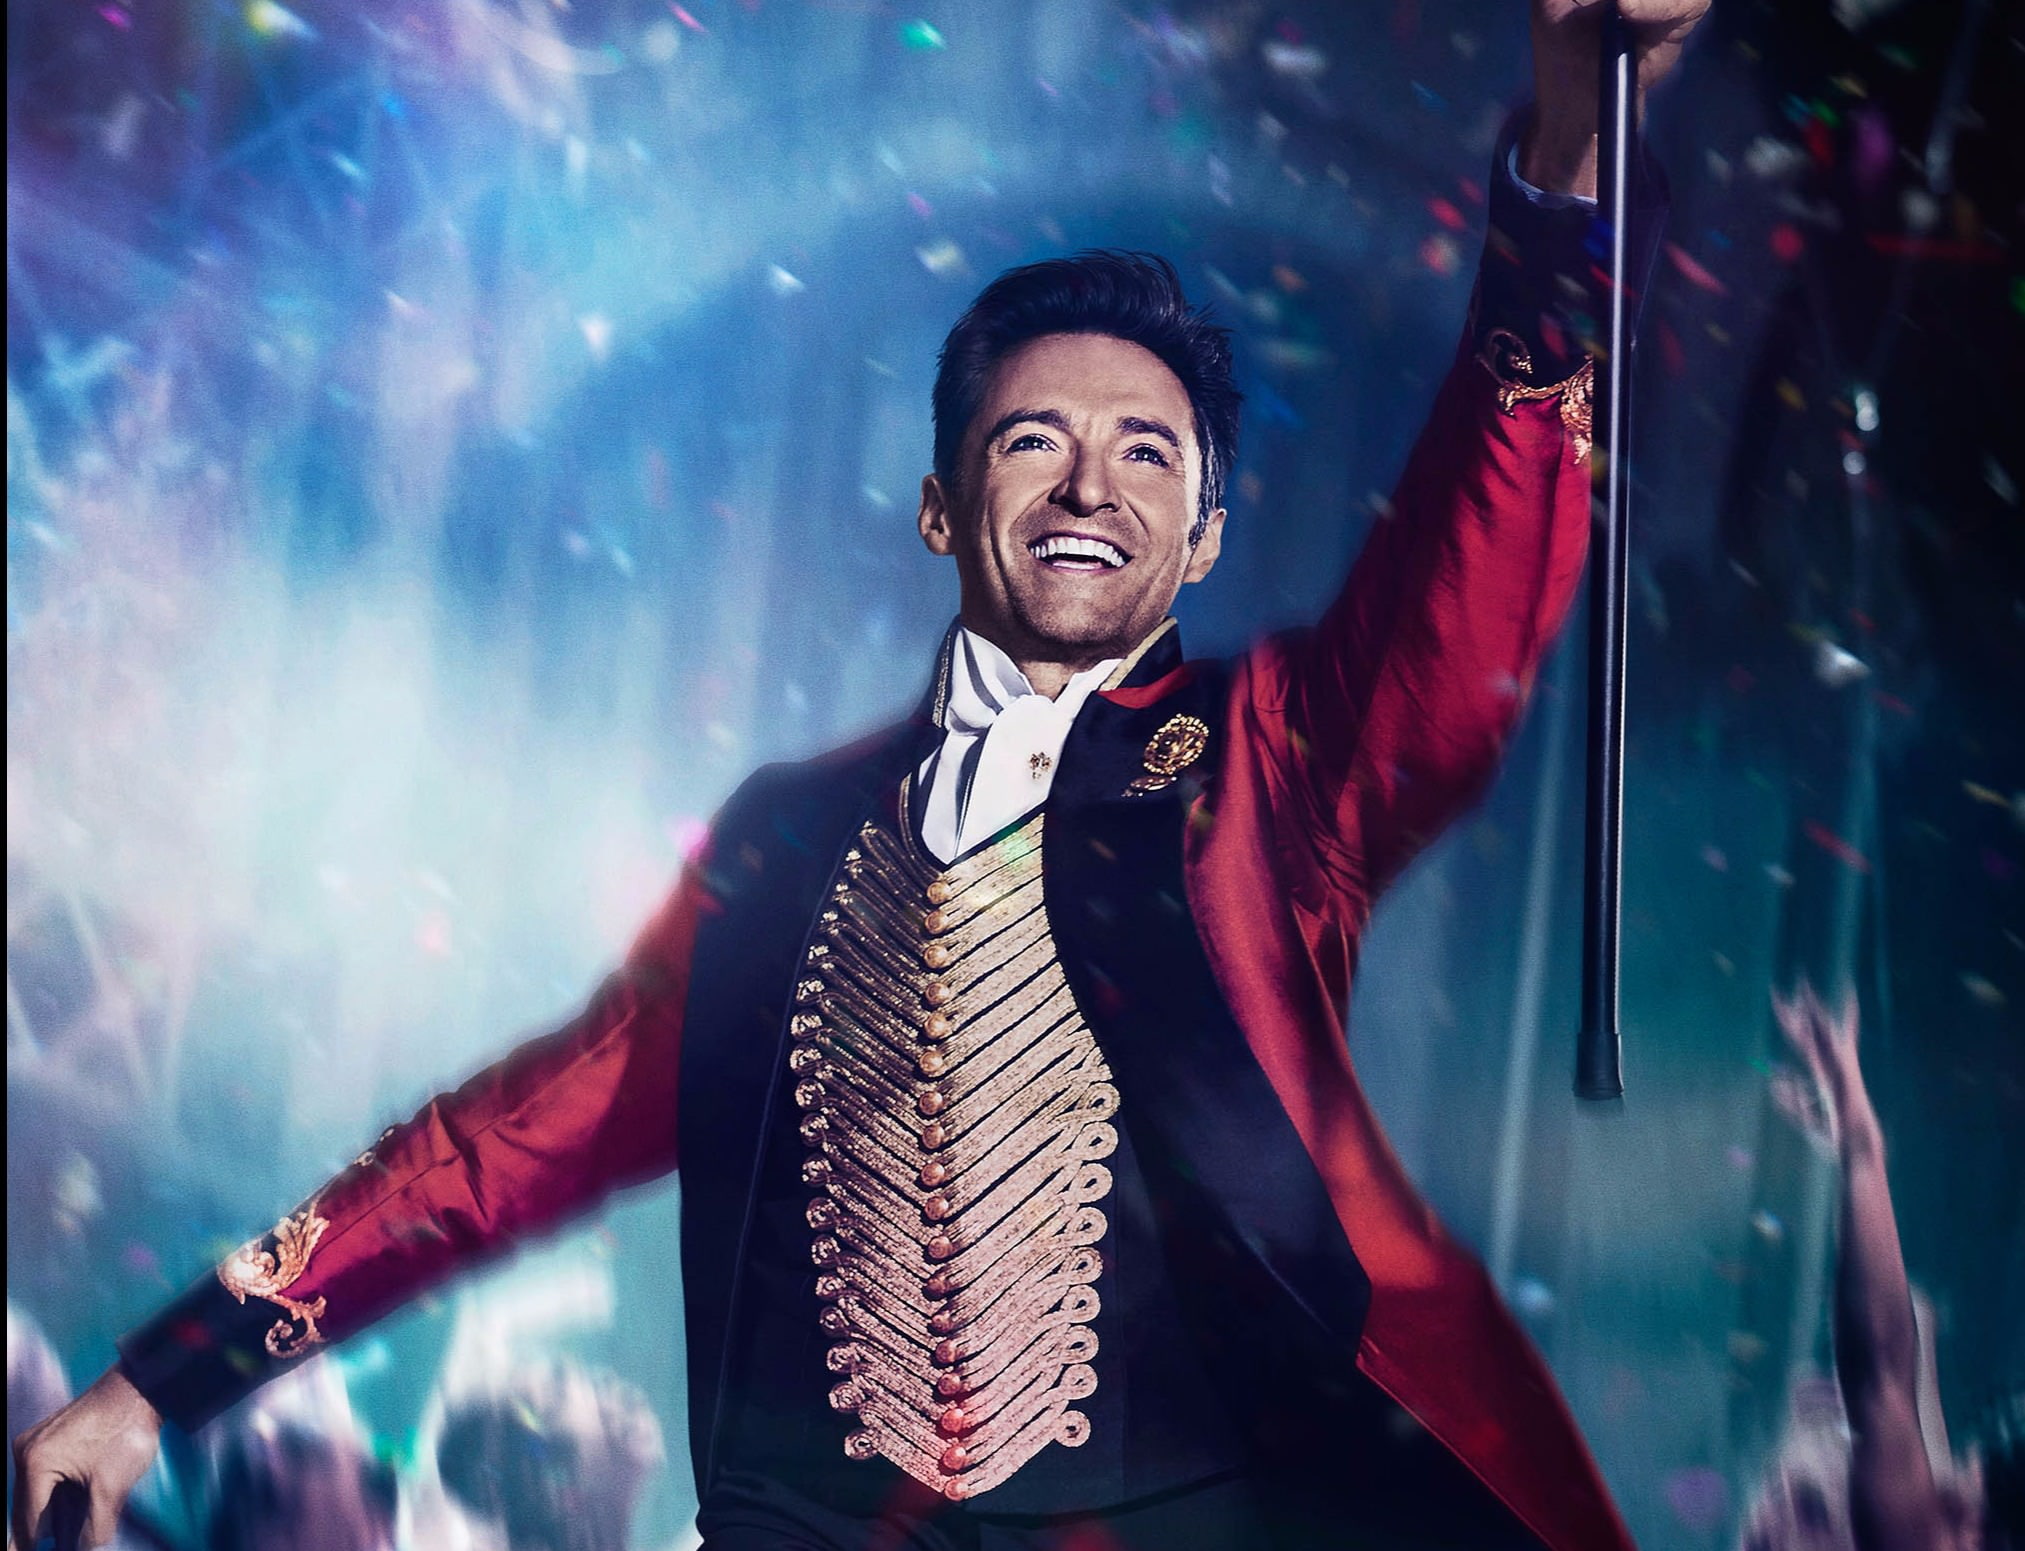 Hugh Jackman From The Greatest Showman 2017, happiness, smiling